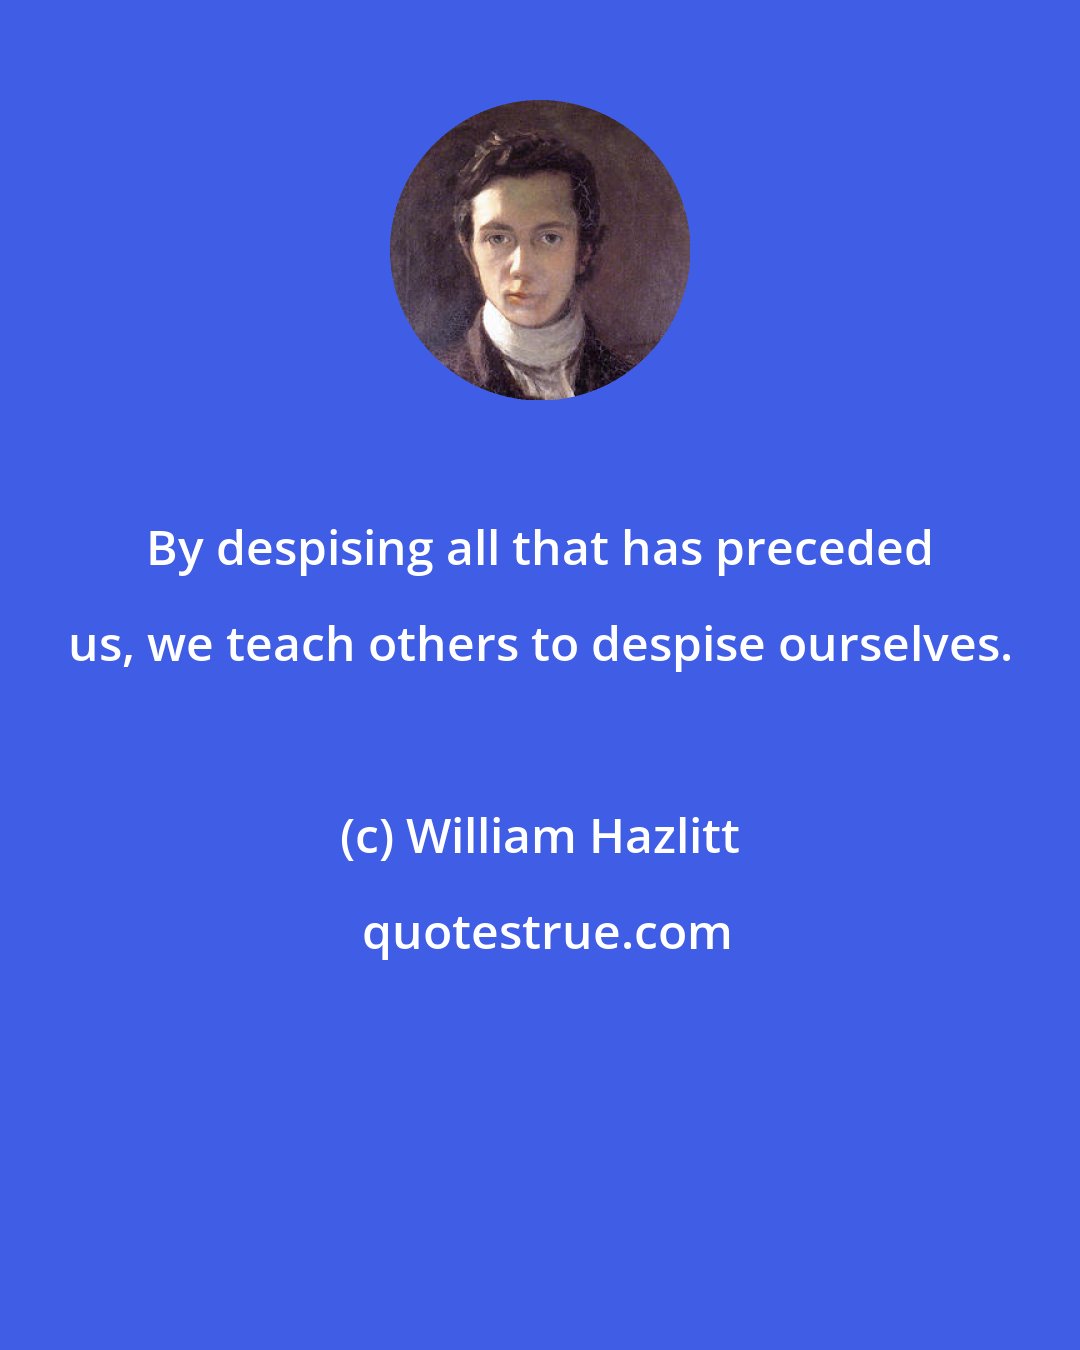 William Hazlitt: By despising all that has preceded us, we teach others to despise ourselves.